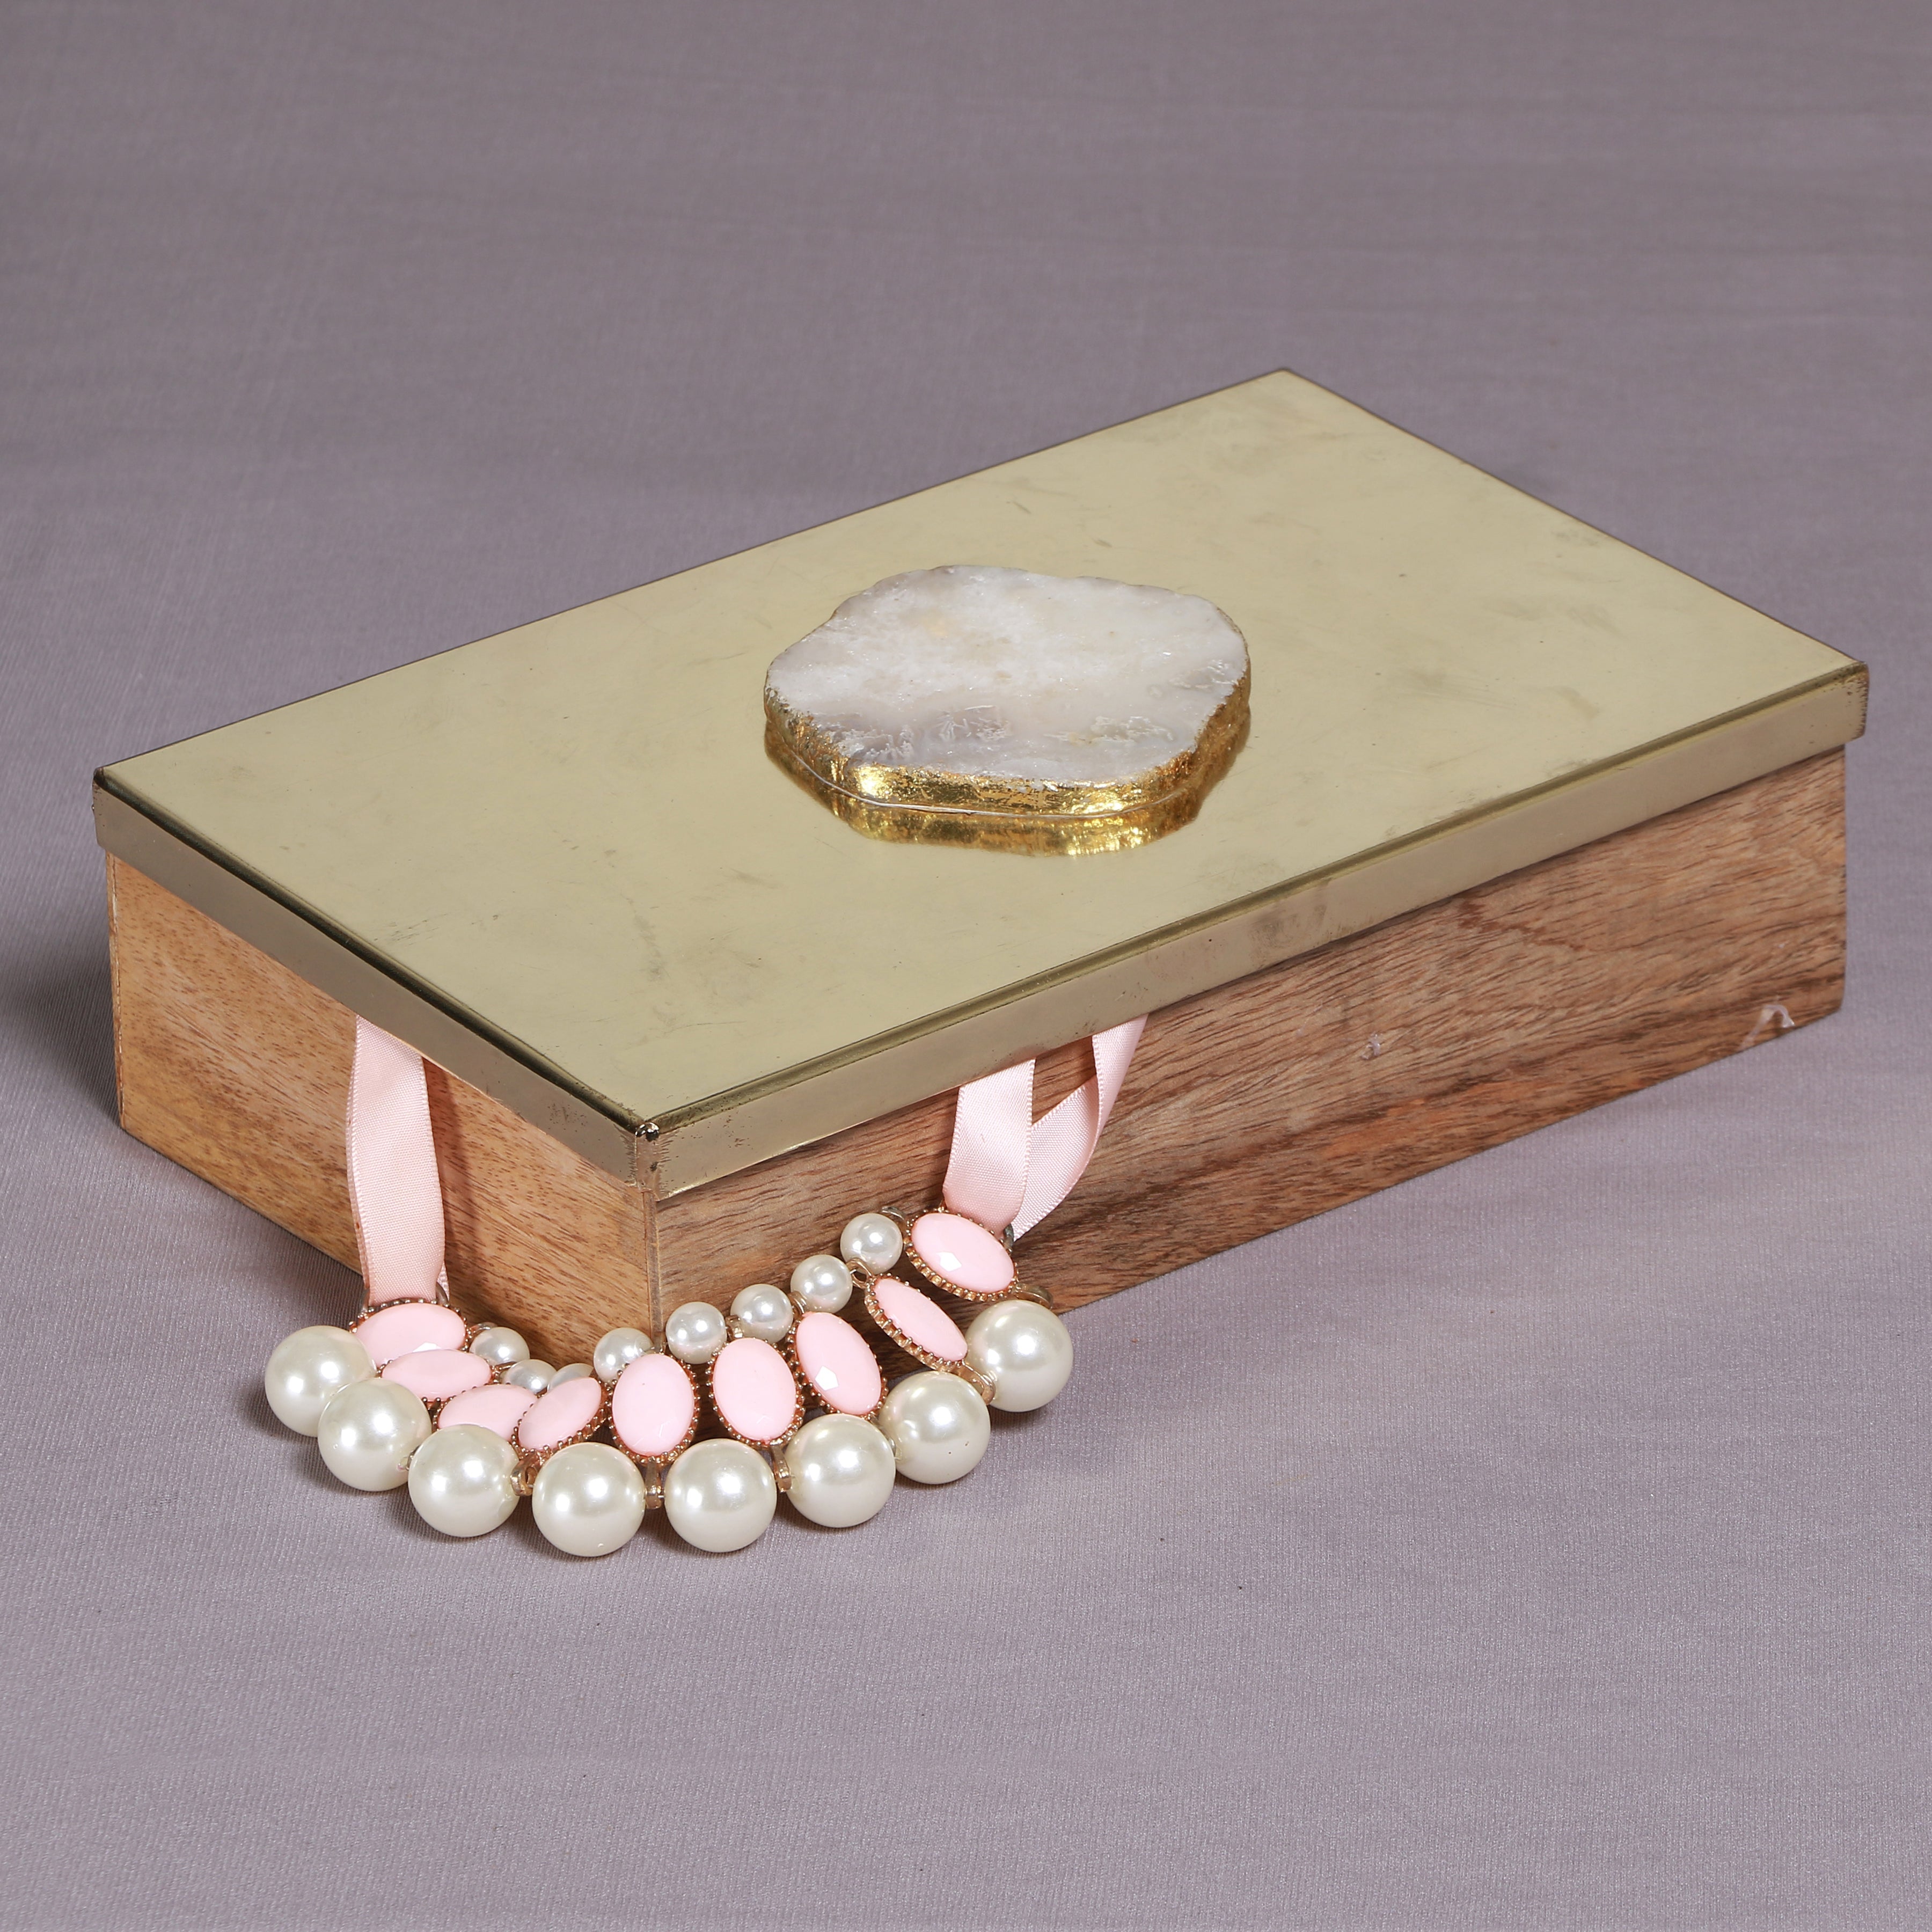 Metal and Wood Decorative Box with Agate Top